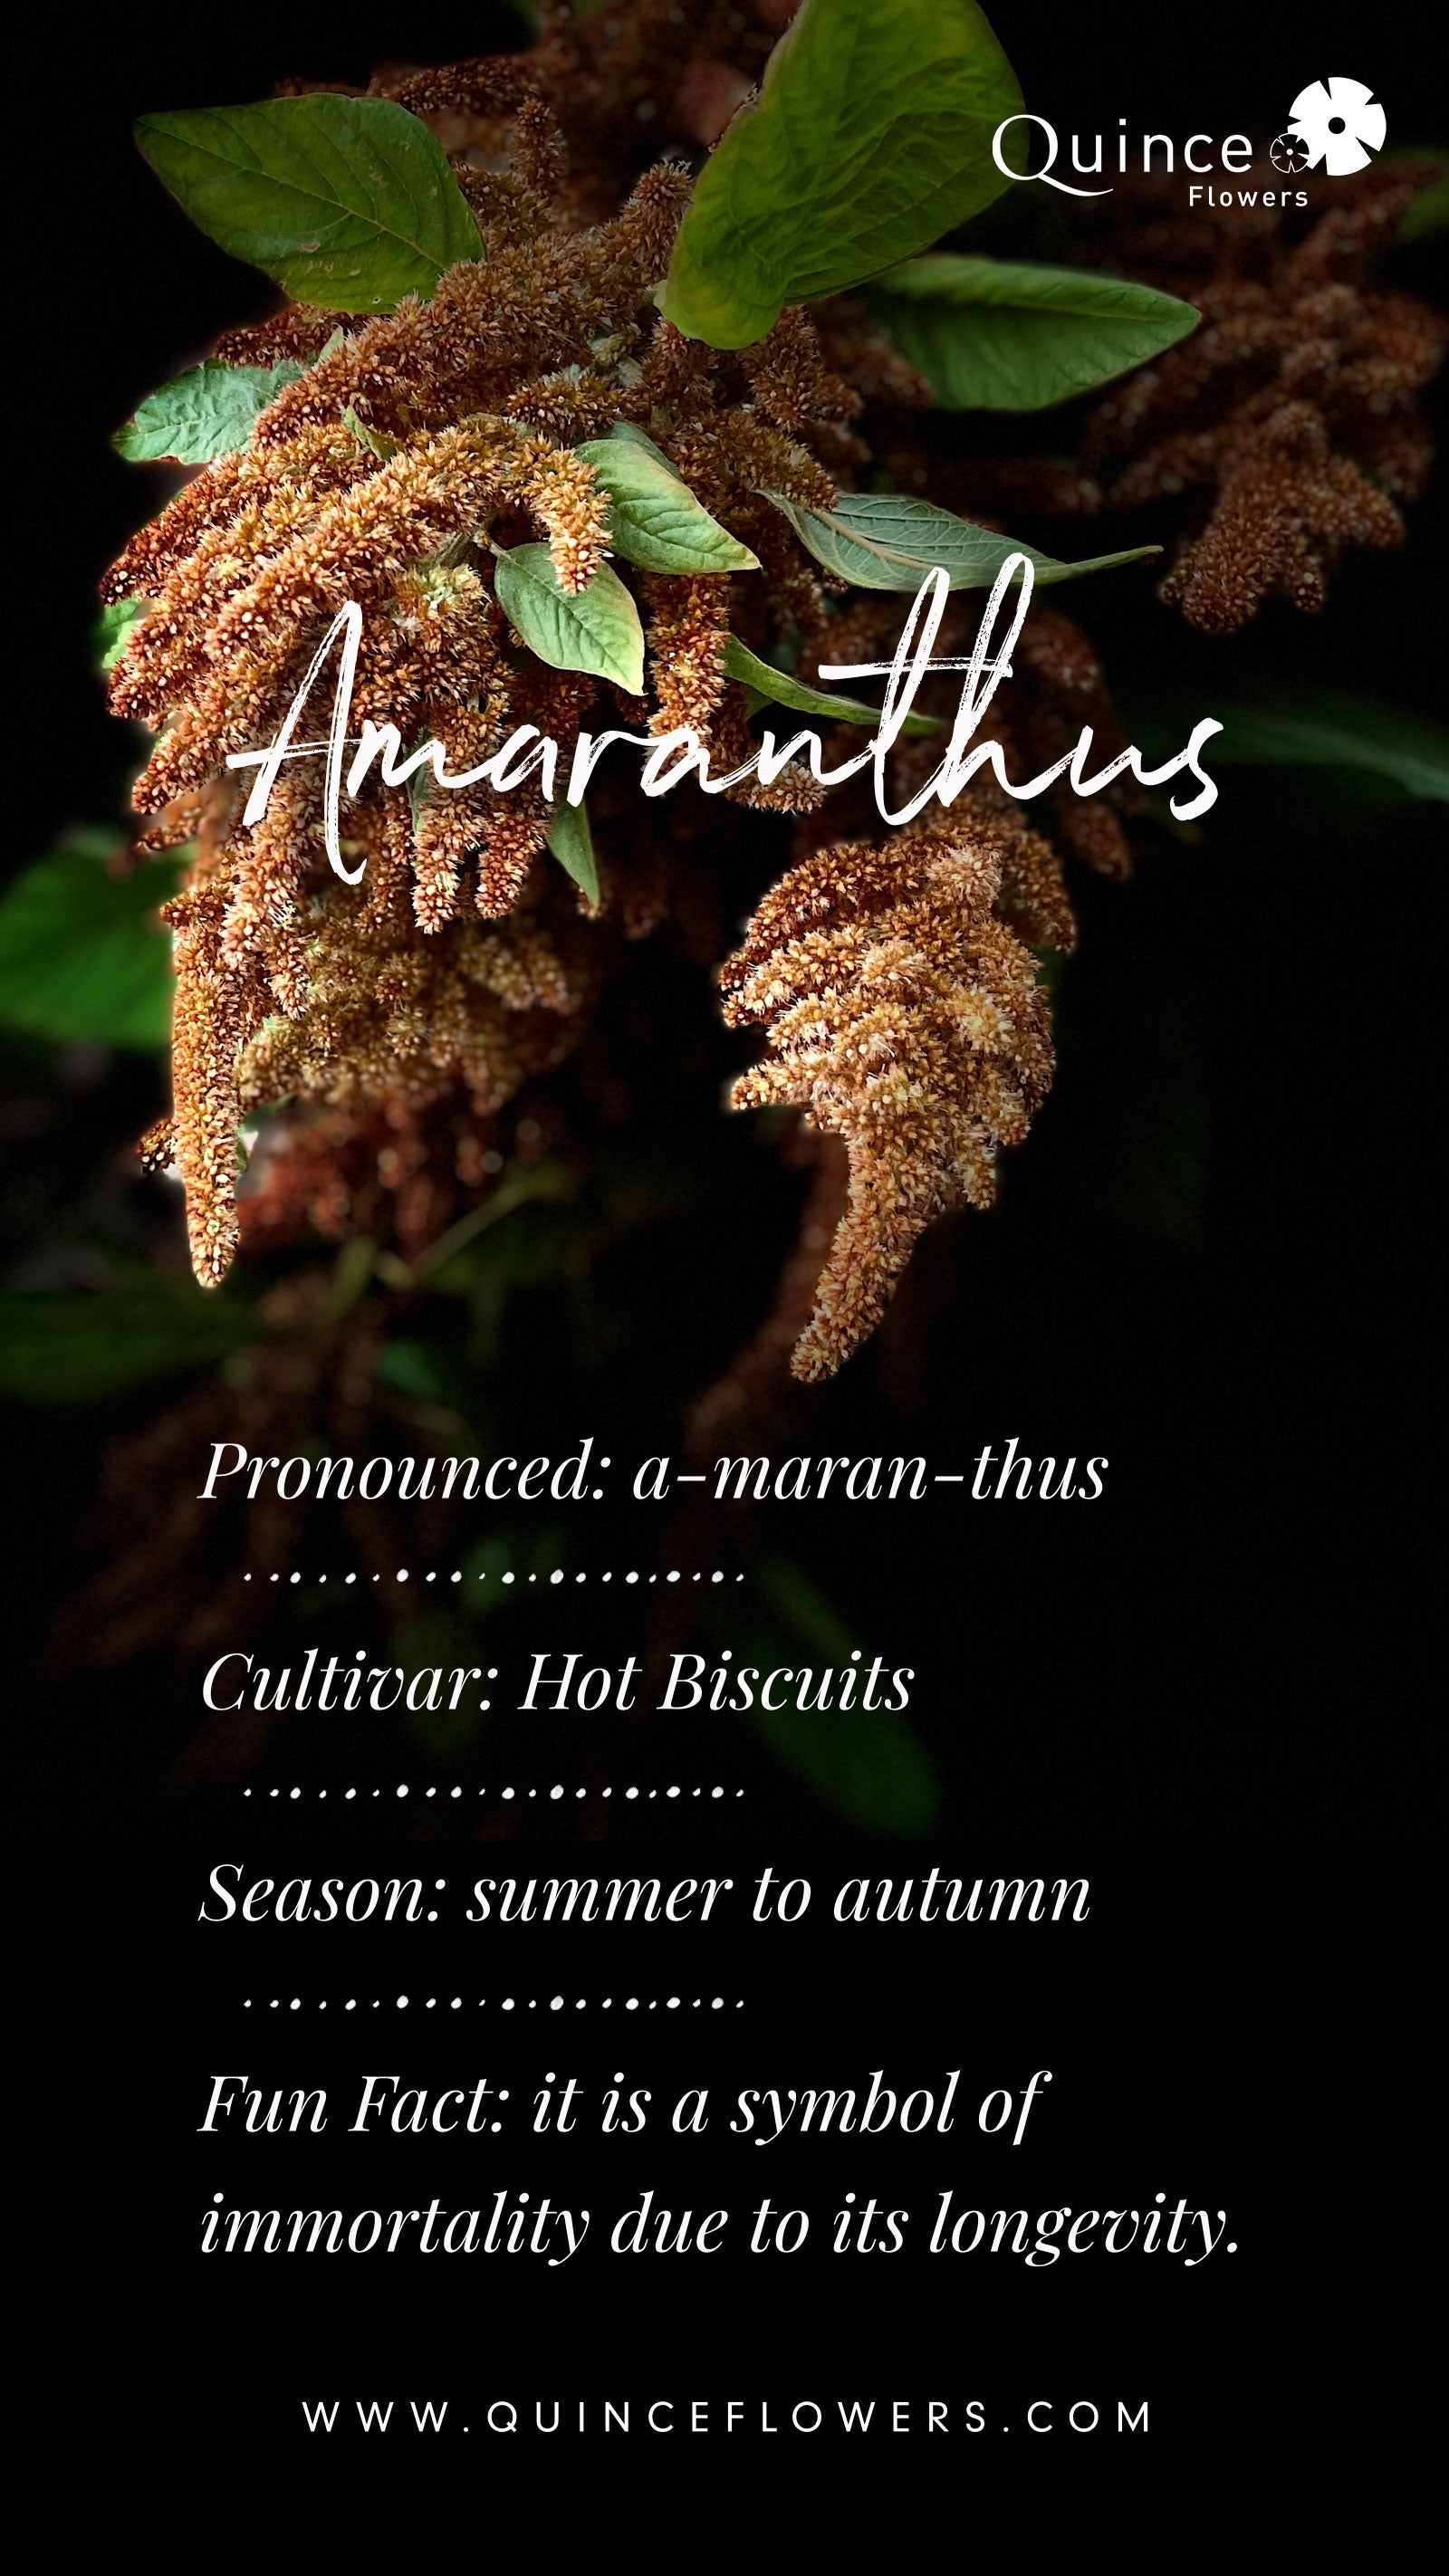 Close-up image of Amaranthus ‘Hot Biscuits’ flowers, brownish in color, surrounded by green leaves against a dark background. The image includes white text providing information about the flower’s pronunciation, cultivar, seasonality, and symbolism of immortality. The Quince Flowers logo and website are displayed at the top and bottom respectively. Order online for same-day flower delivery from the best florist in Toronto near you.